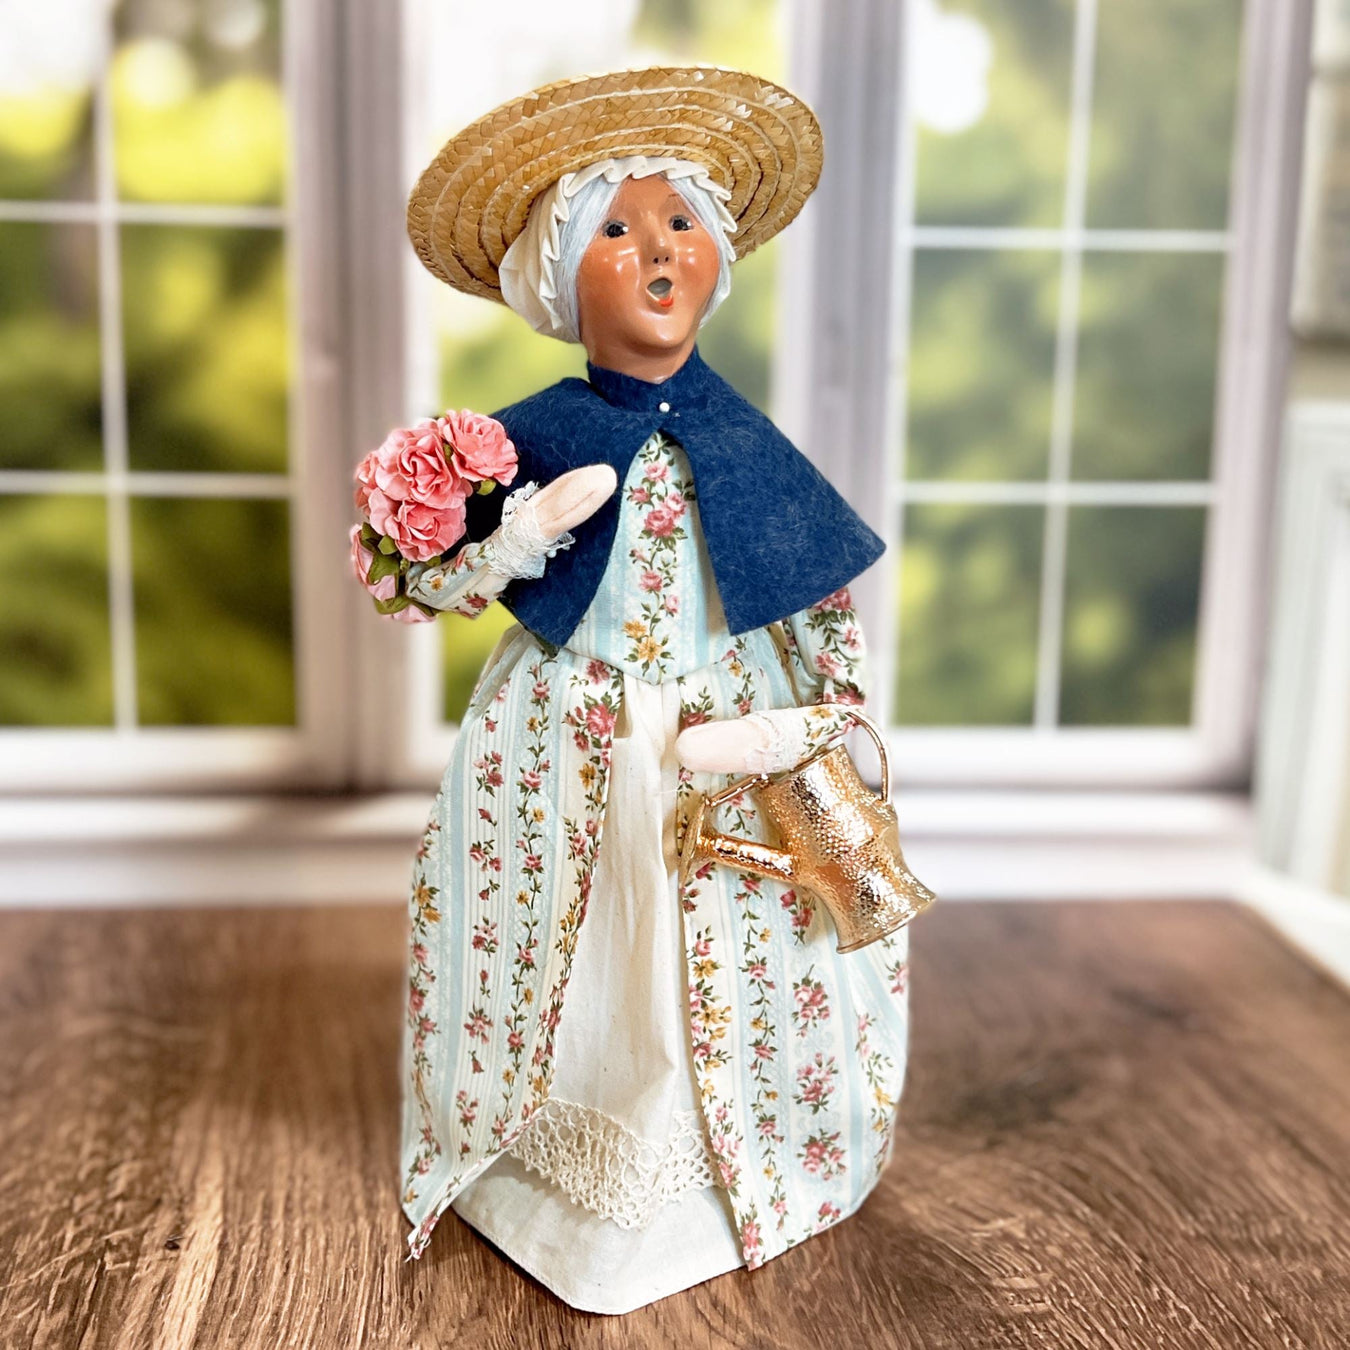 Gardening Martha Caroler by Byers' Choice - BYER'S CHOICE, LTD - The Shops at Mount Vernon